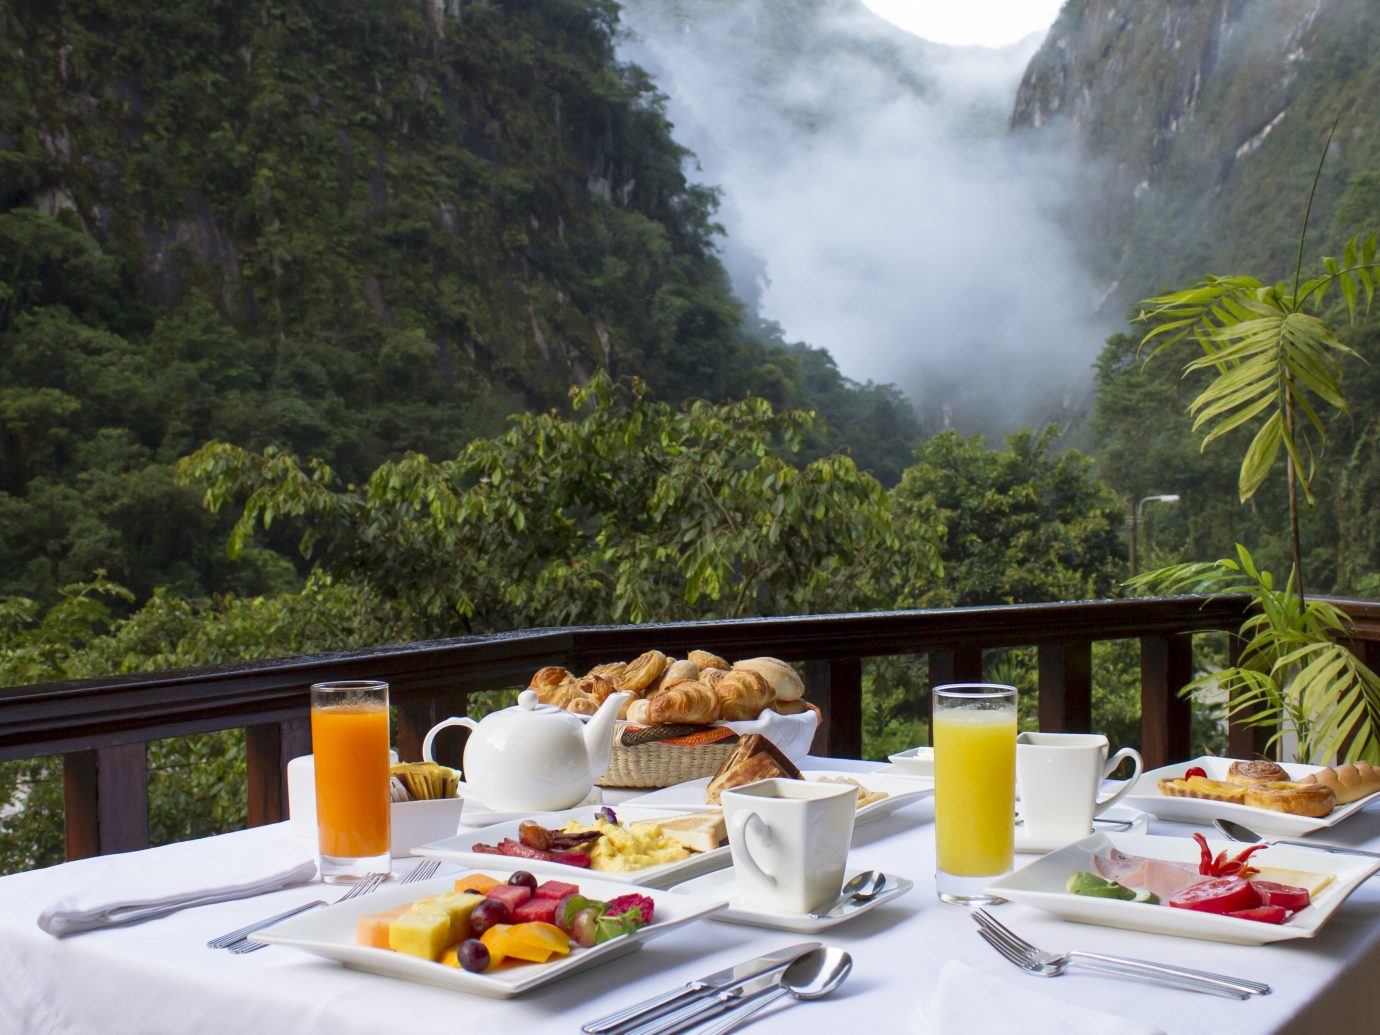 Beautiful breakfast with fruit juices, fruit and pastries overlooking steamy, lush mountains at SUMAQ